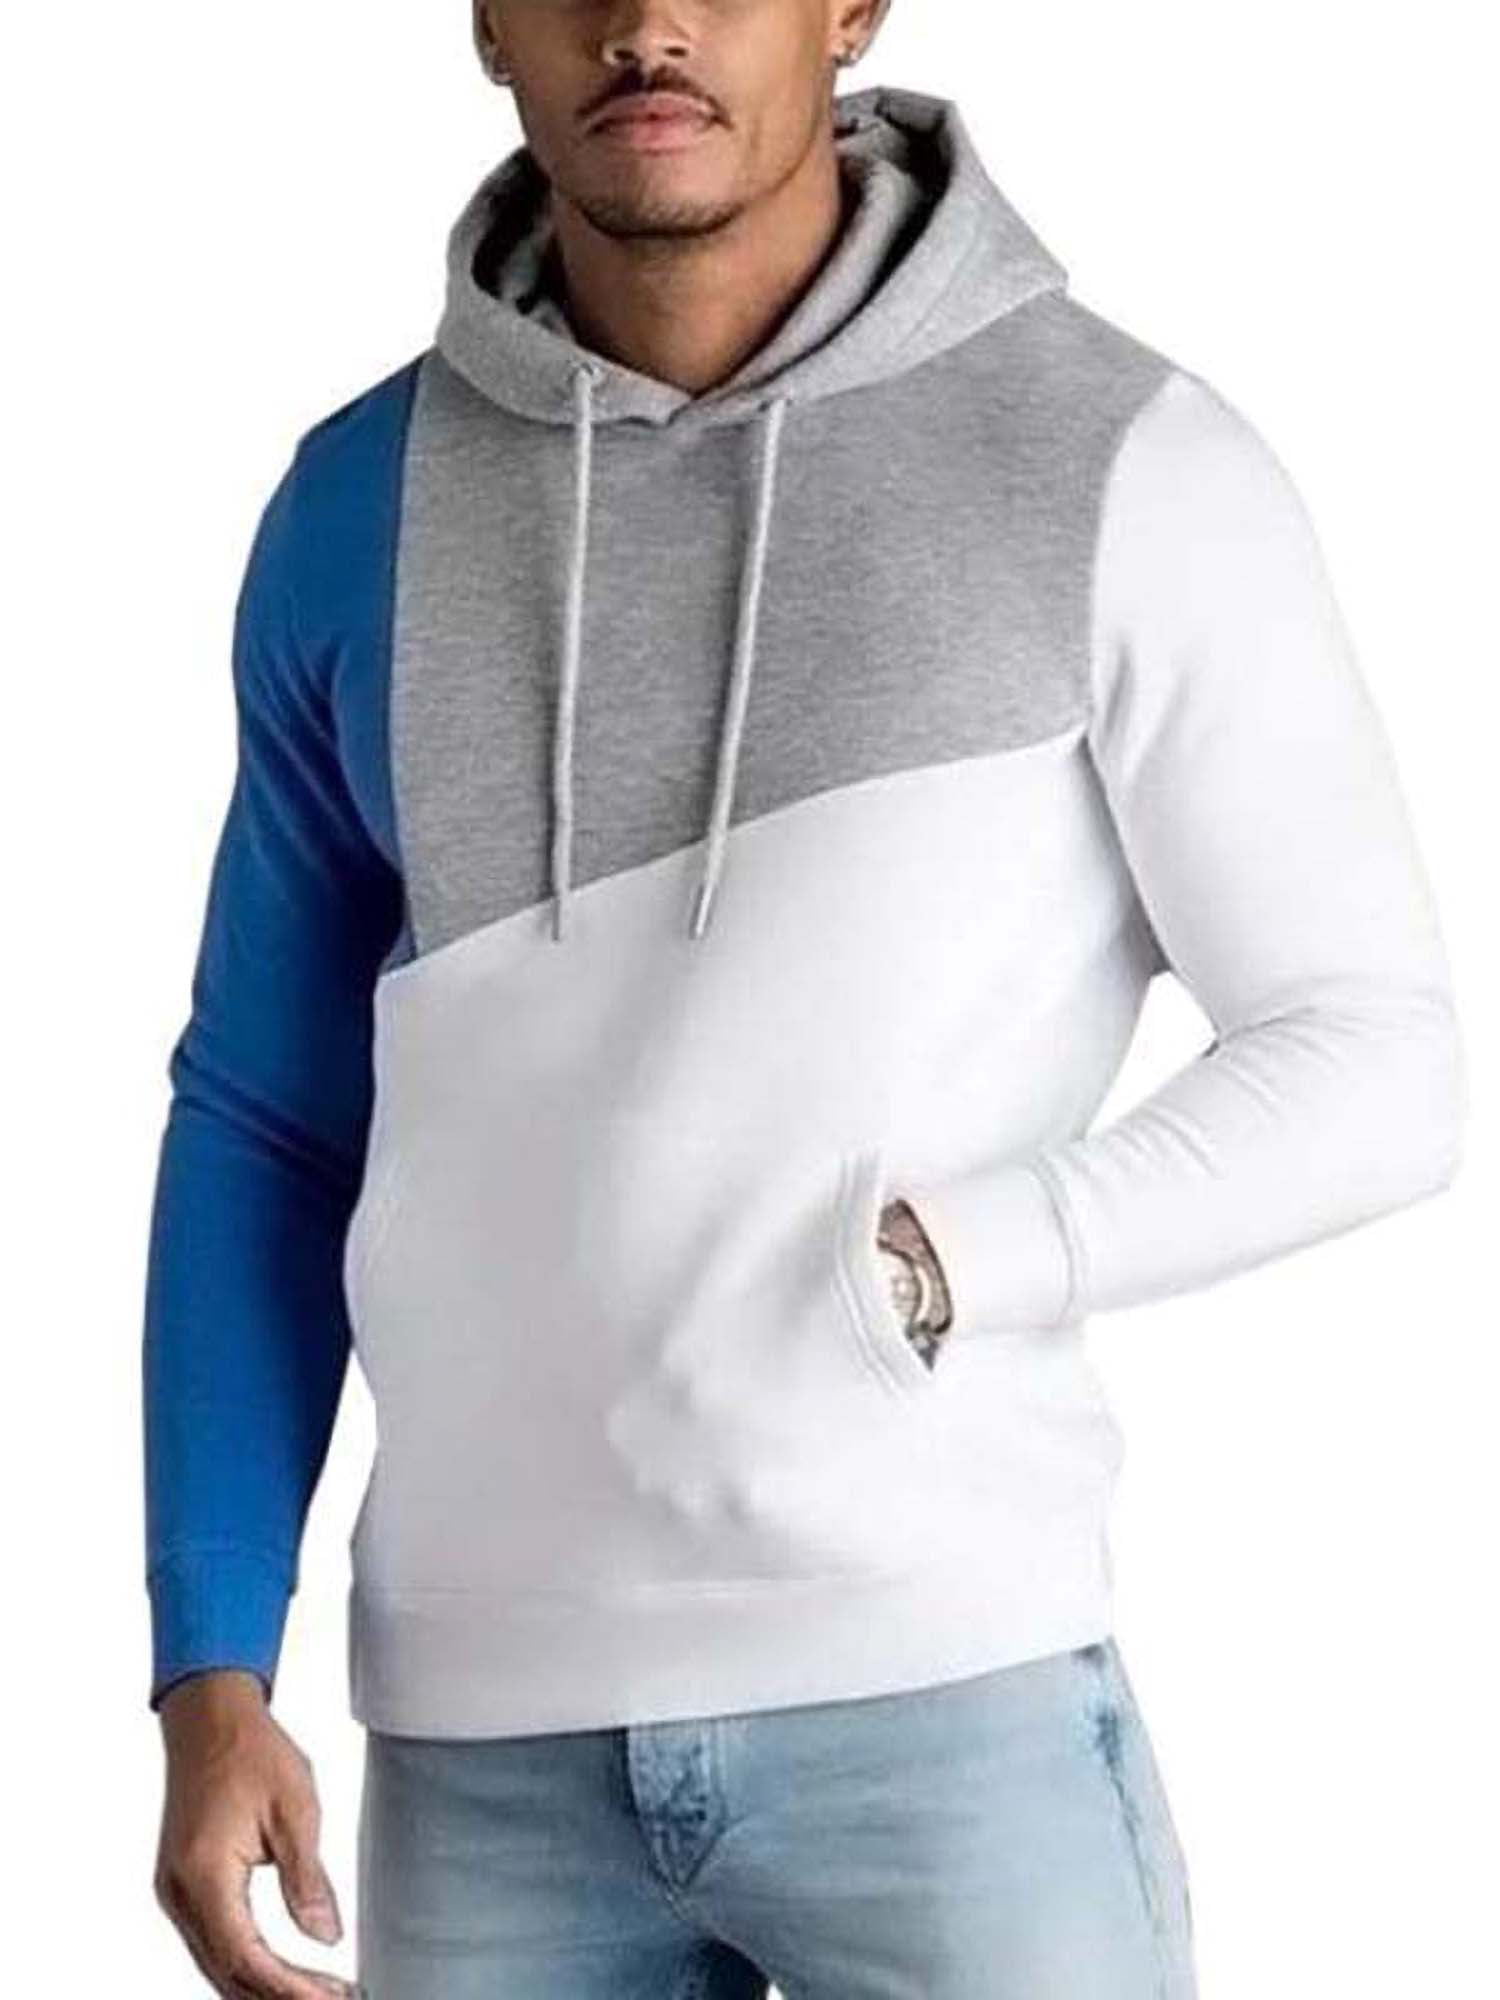 FUNEY Mens Fashion Athletic Hoodies Sport Sweatshirt Short Sleeve Drawsting Shirts Hipster Hip Hop Pullover with Pockets 